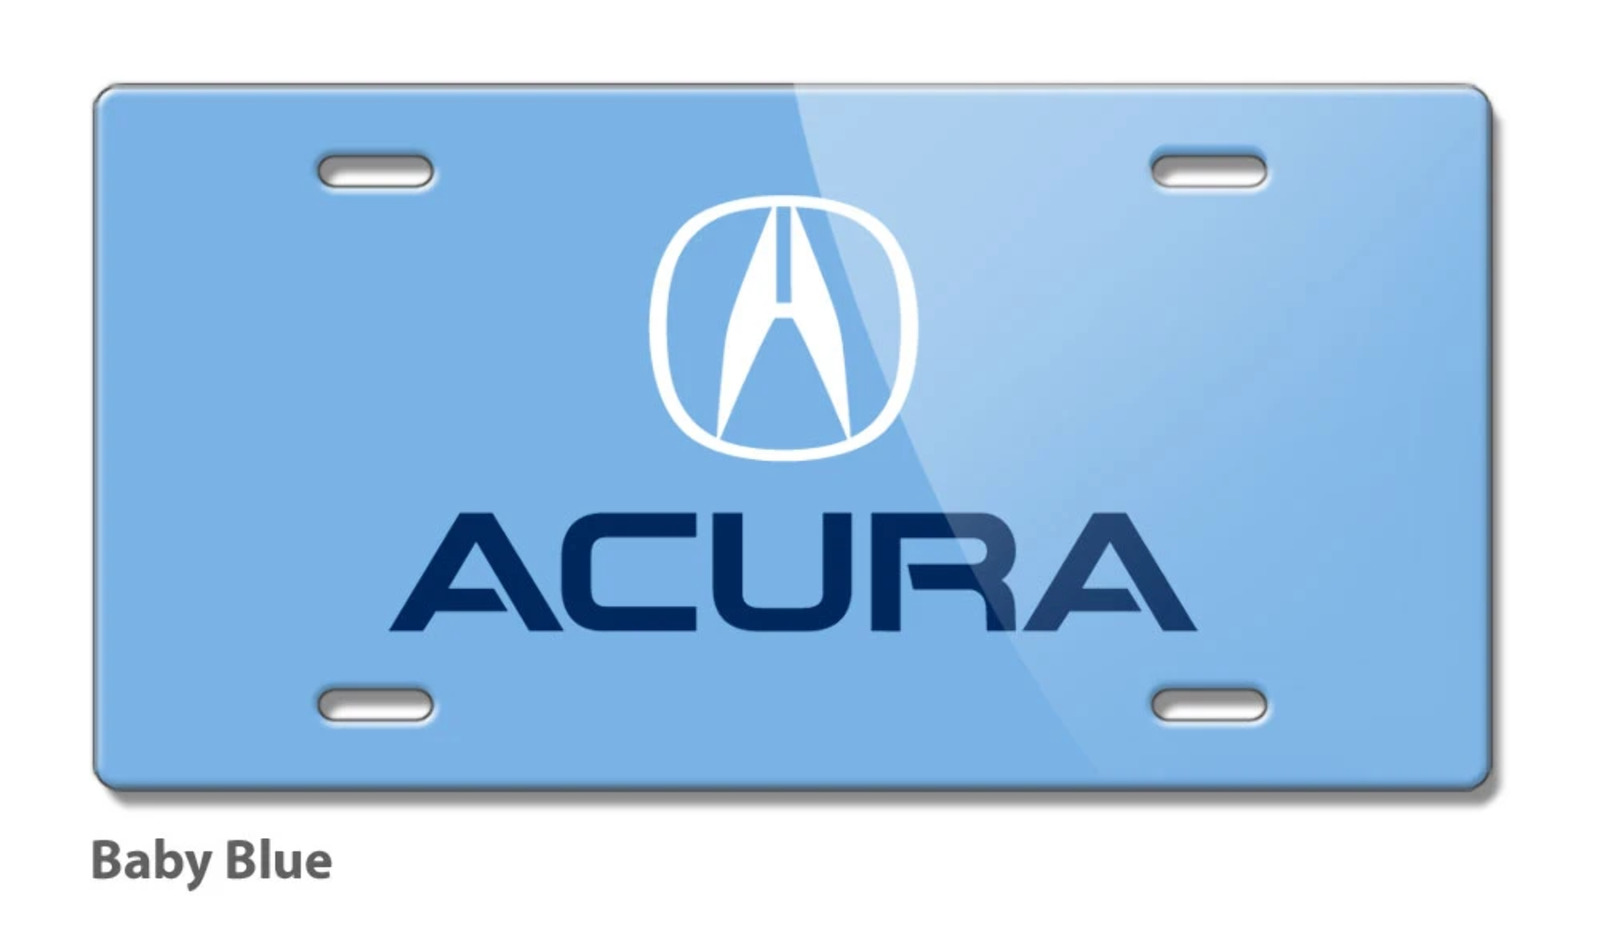 Acura Logo Novelty License Plate - Aluminum - 16 colors - Made in the USA